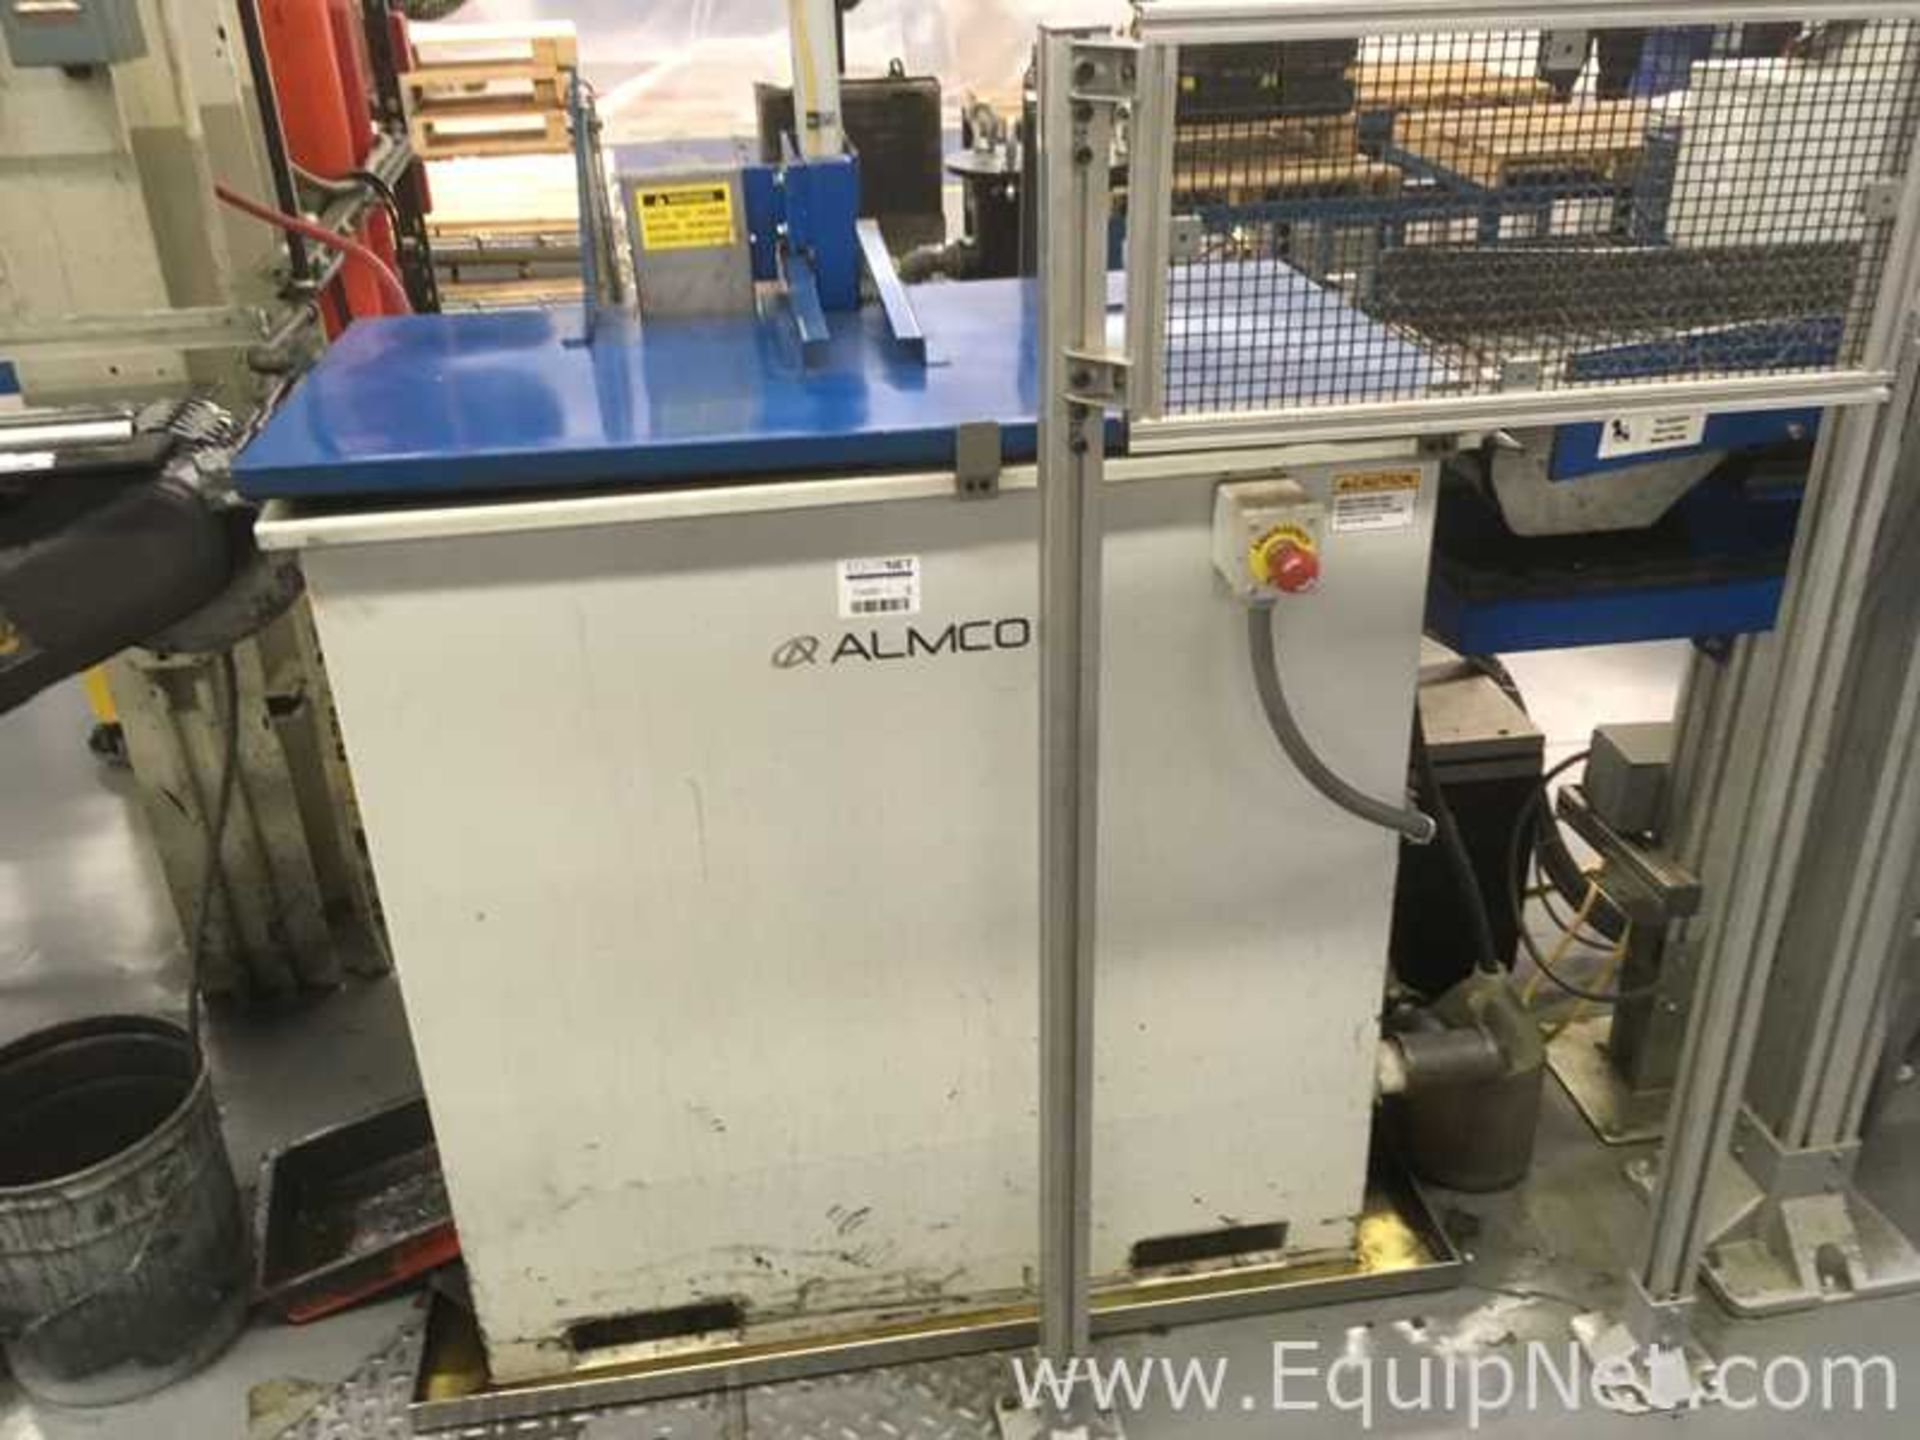 Almco PW 200 Parts Dunk Washer With Agitator Motorized Conveyor and Fire CO2 Suppression System